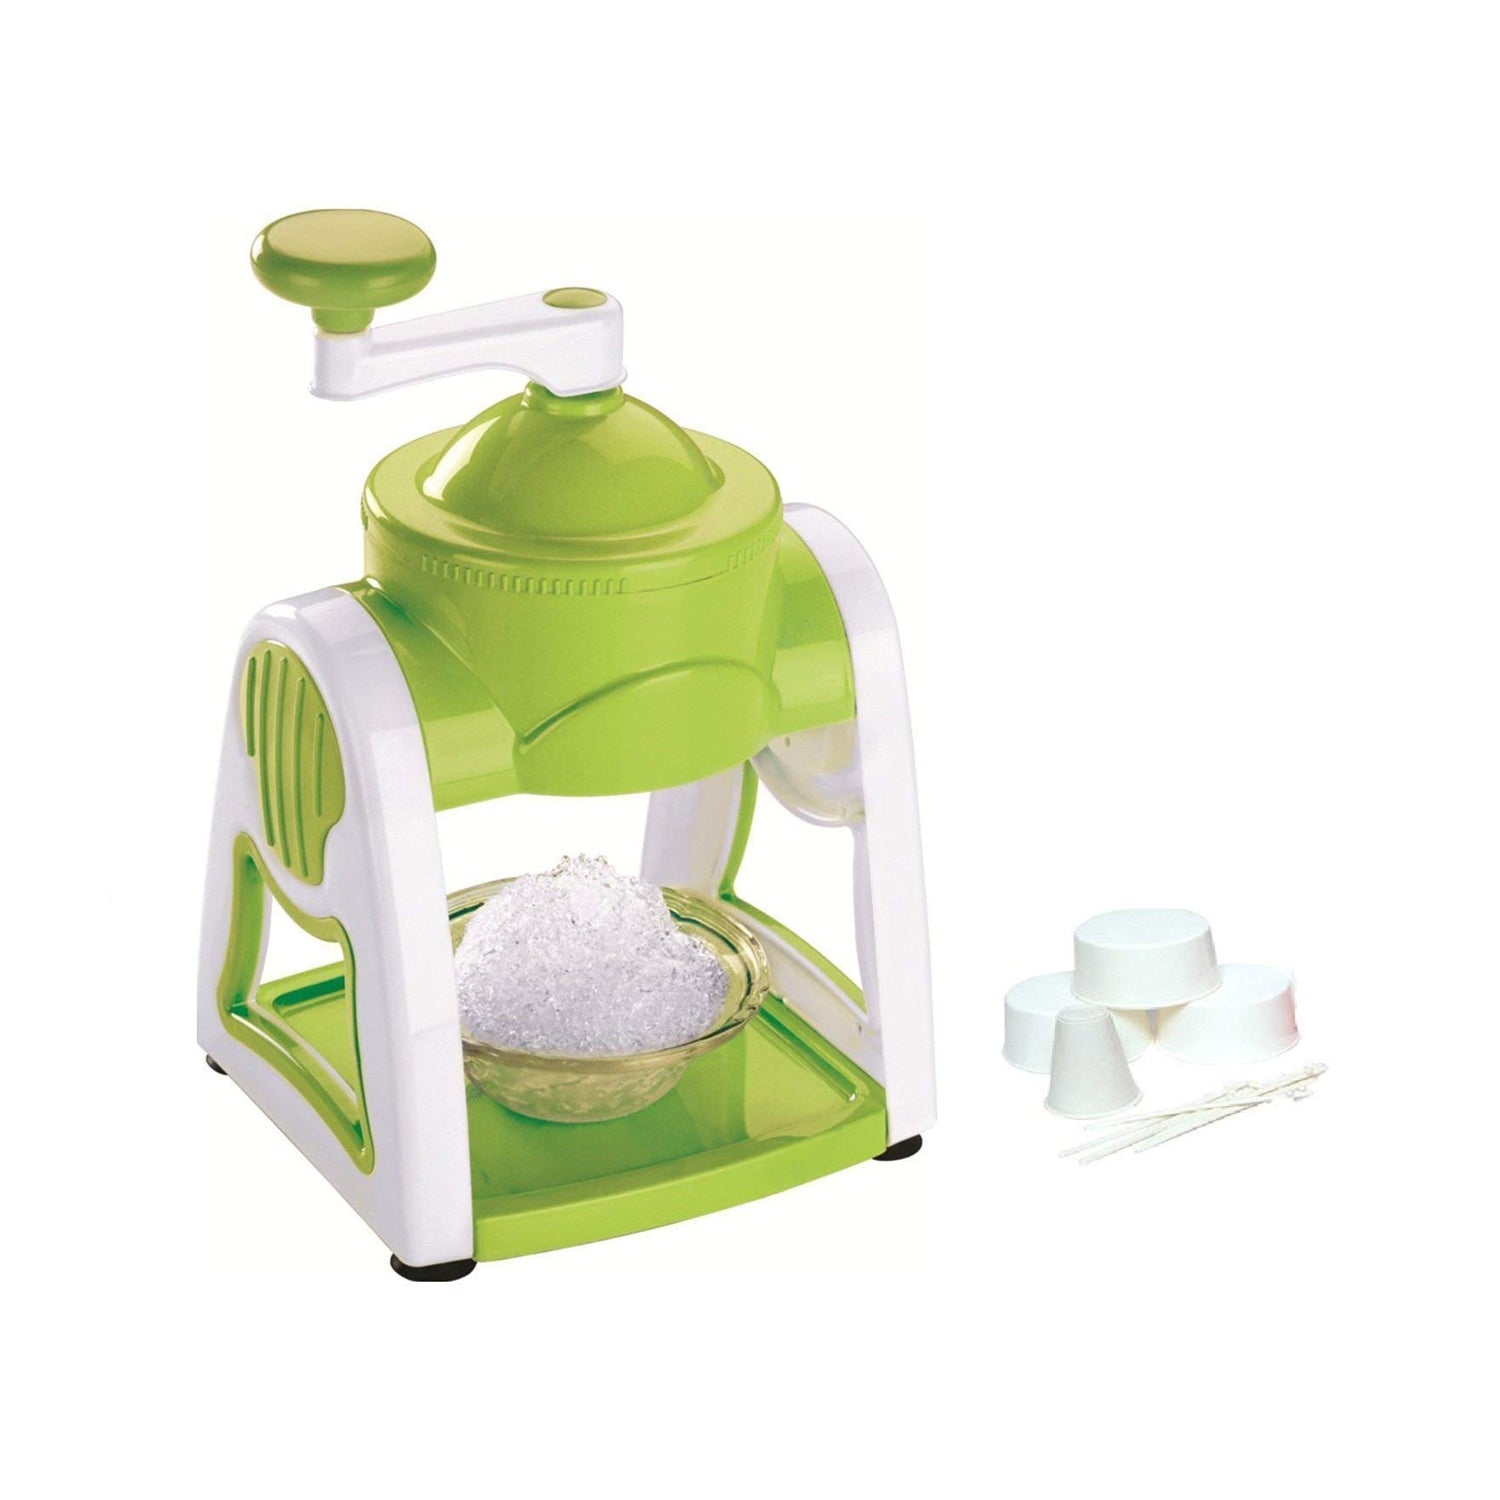 0130 V CB Green Gola Maker used for making golaâ€™s in summers at various kinds of places and all. DeoDap